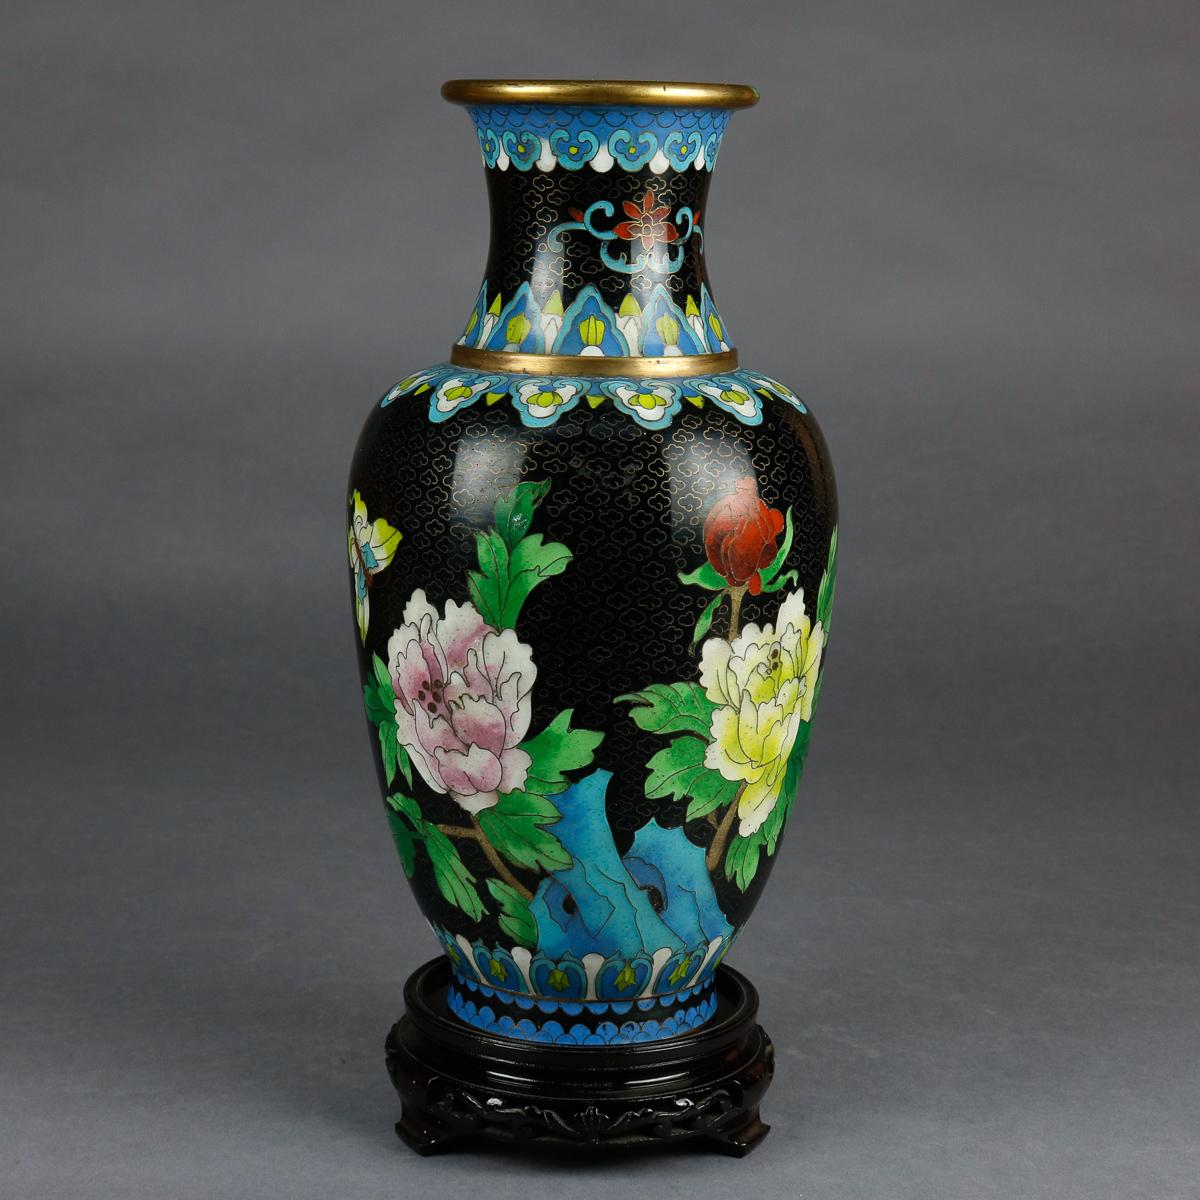 A vintage Chinese Cloisonné vase offers brass construction with hand enameled floral and butterfly decoration with repeating stylized foliate bands at base and collar, includes original box with chop mark verbiage and carved hardwood base, circa